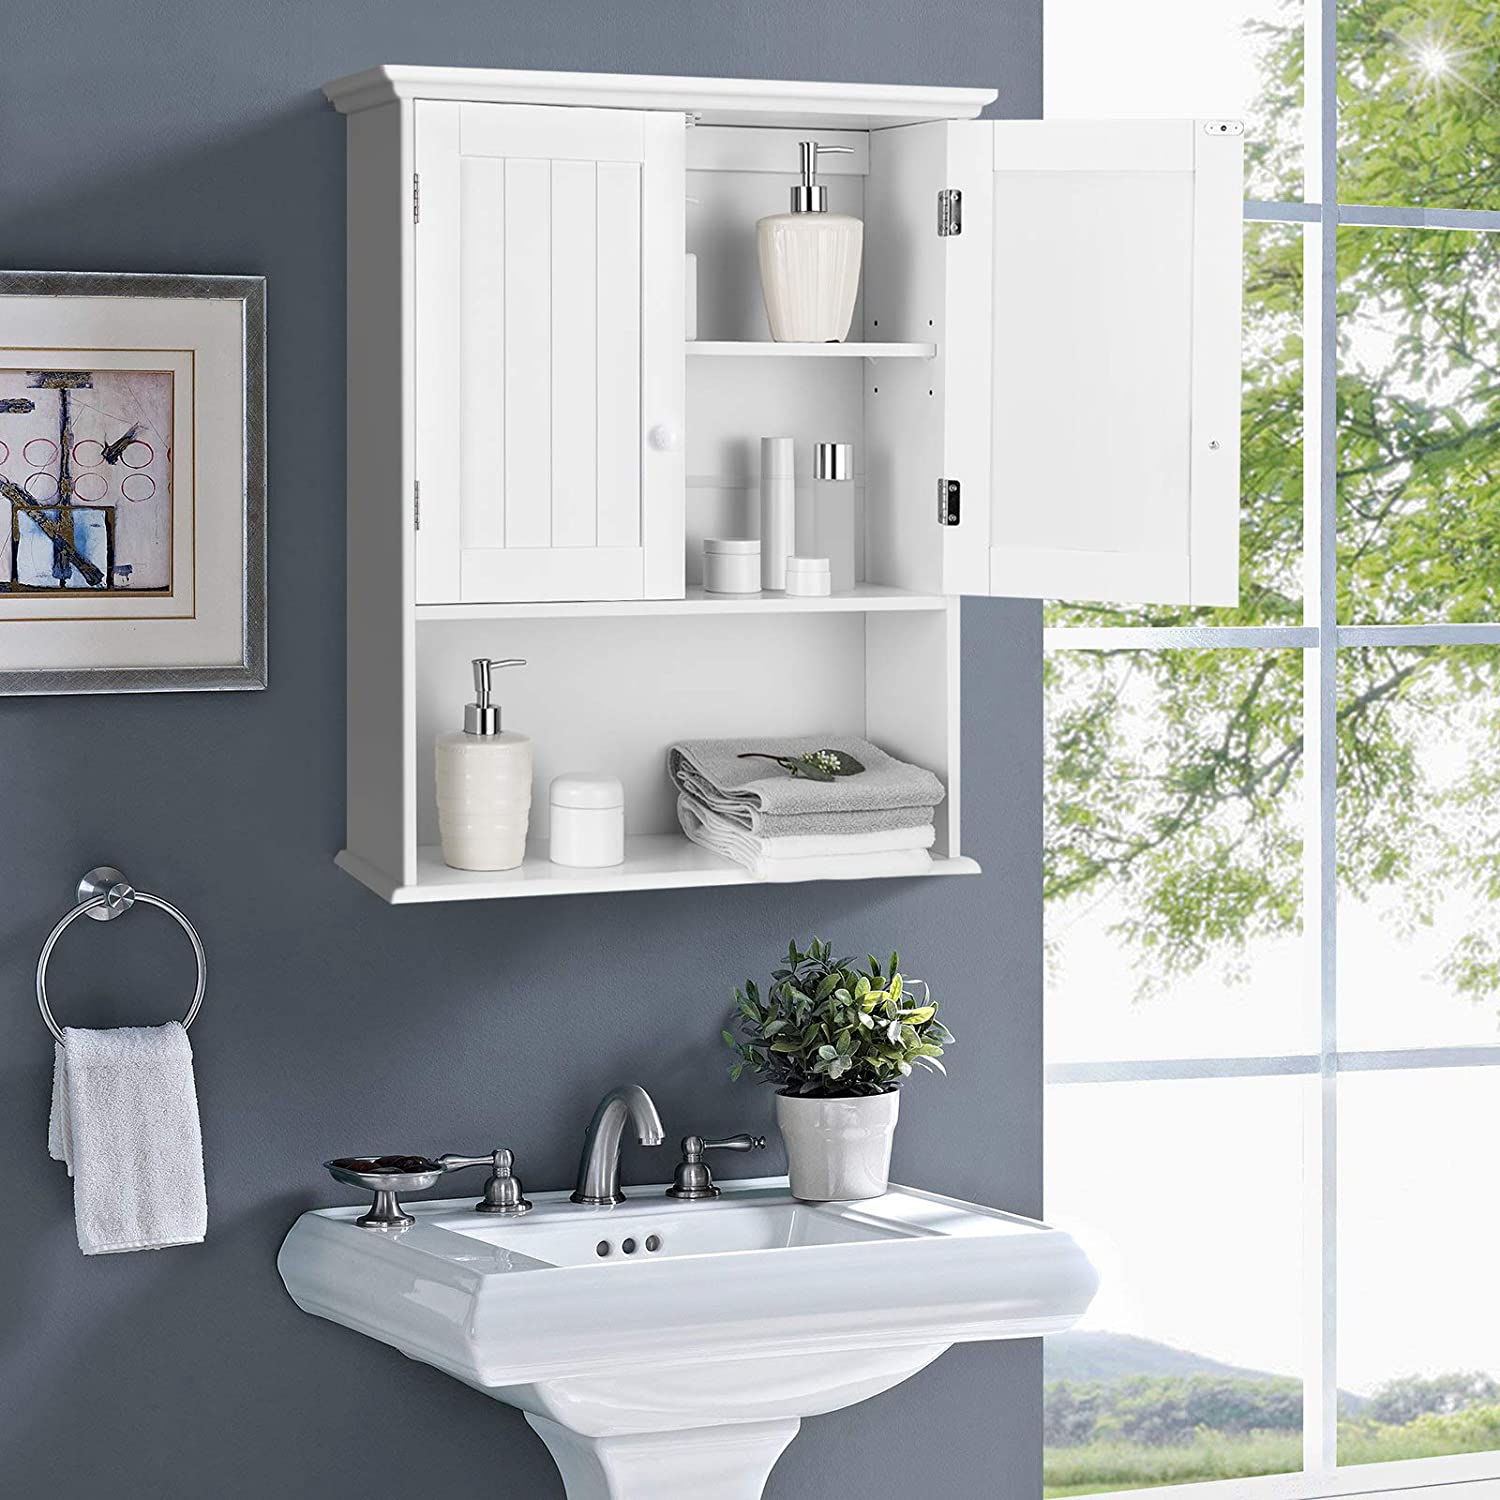 15 Bathroom Storage Upgrades You Need in Your Life